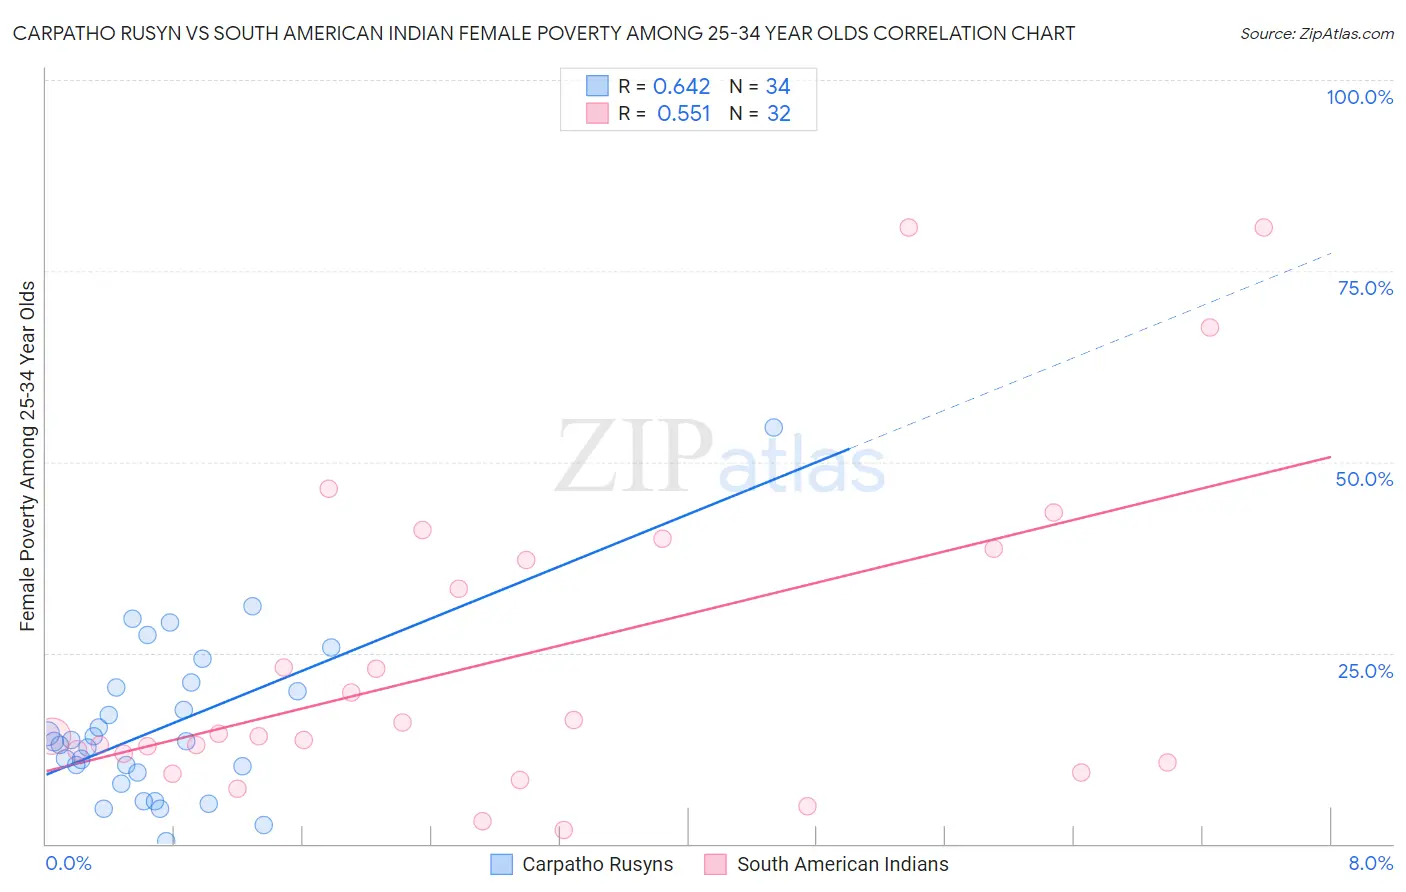 Carpatho Rusyn vs South American Indian Female Poverty Among 25-34 Year Olds